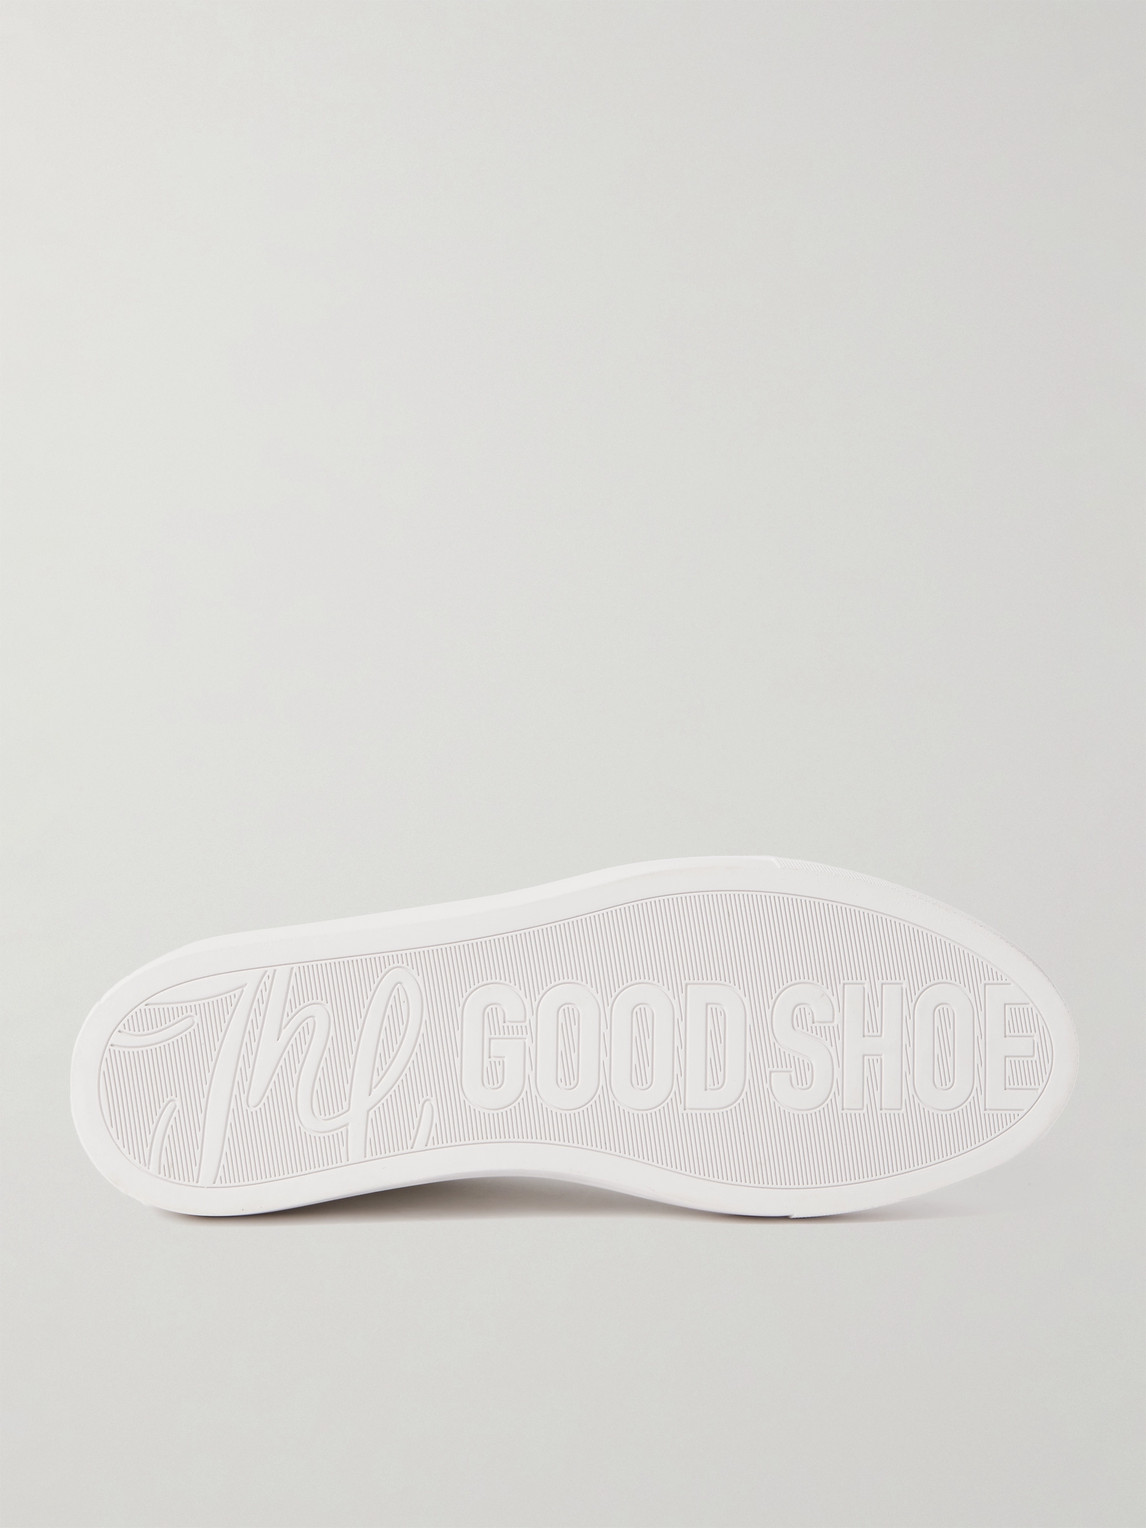 Shop Grenson Leather Sneakers In White